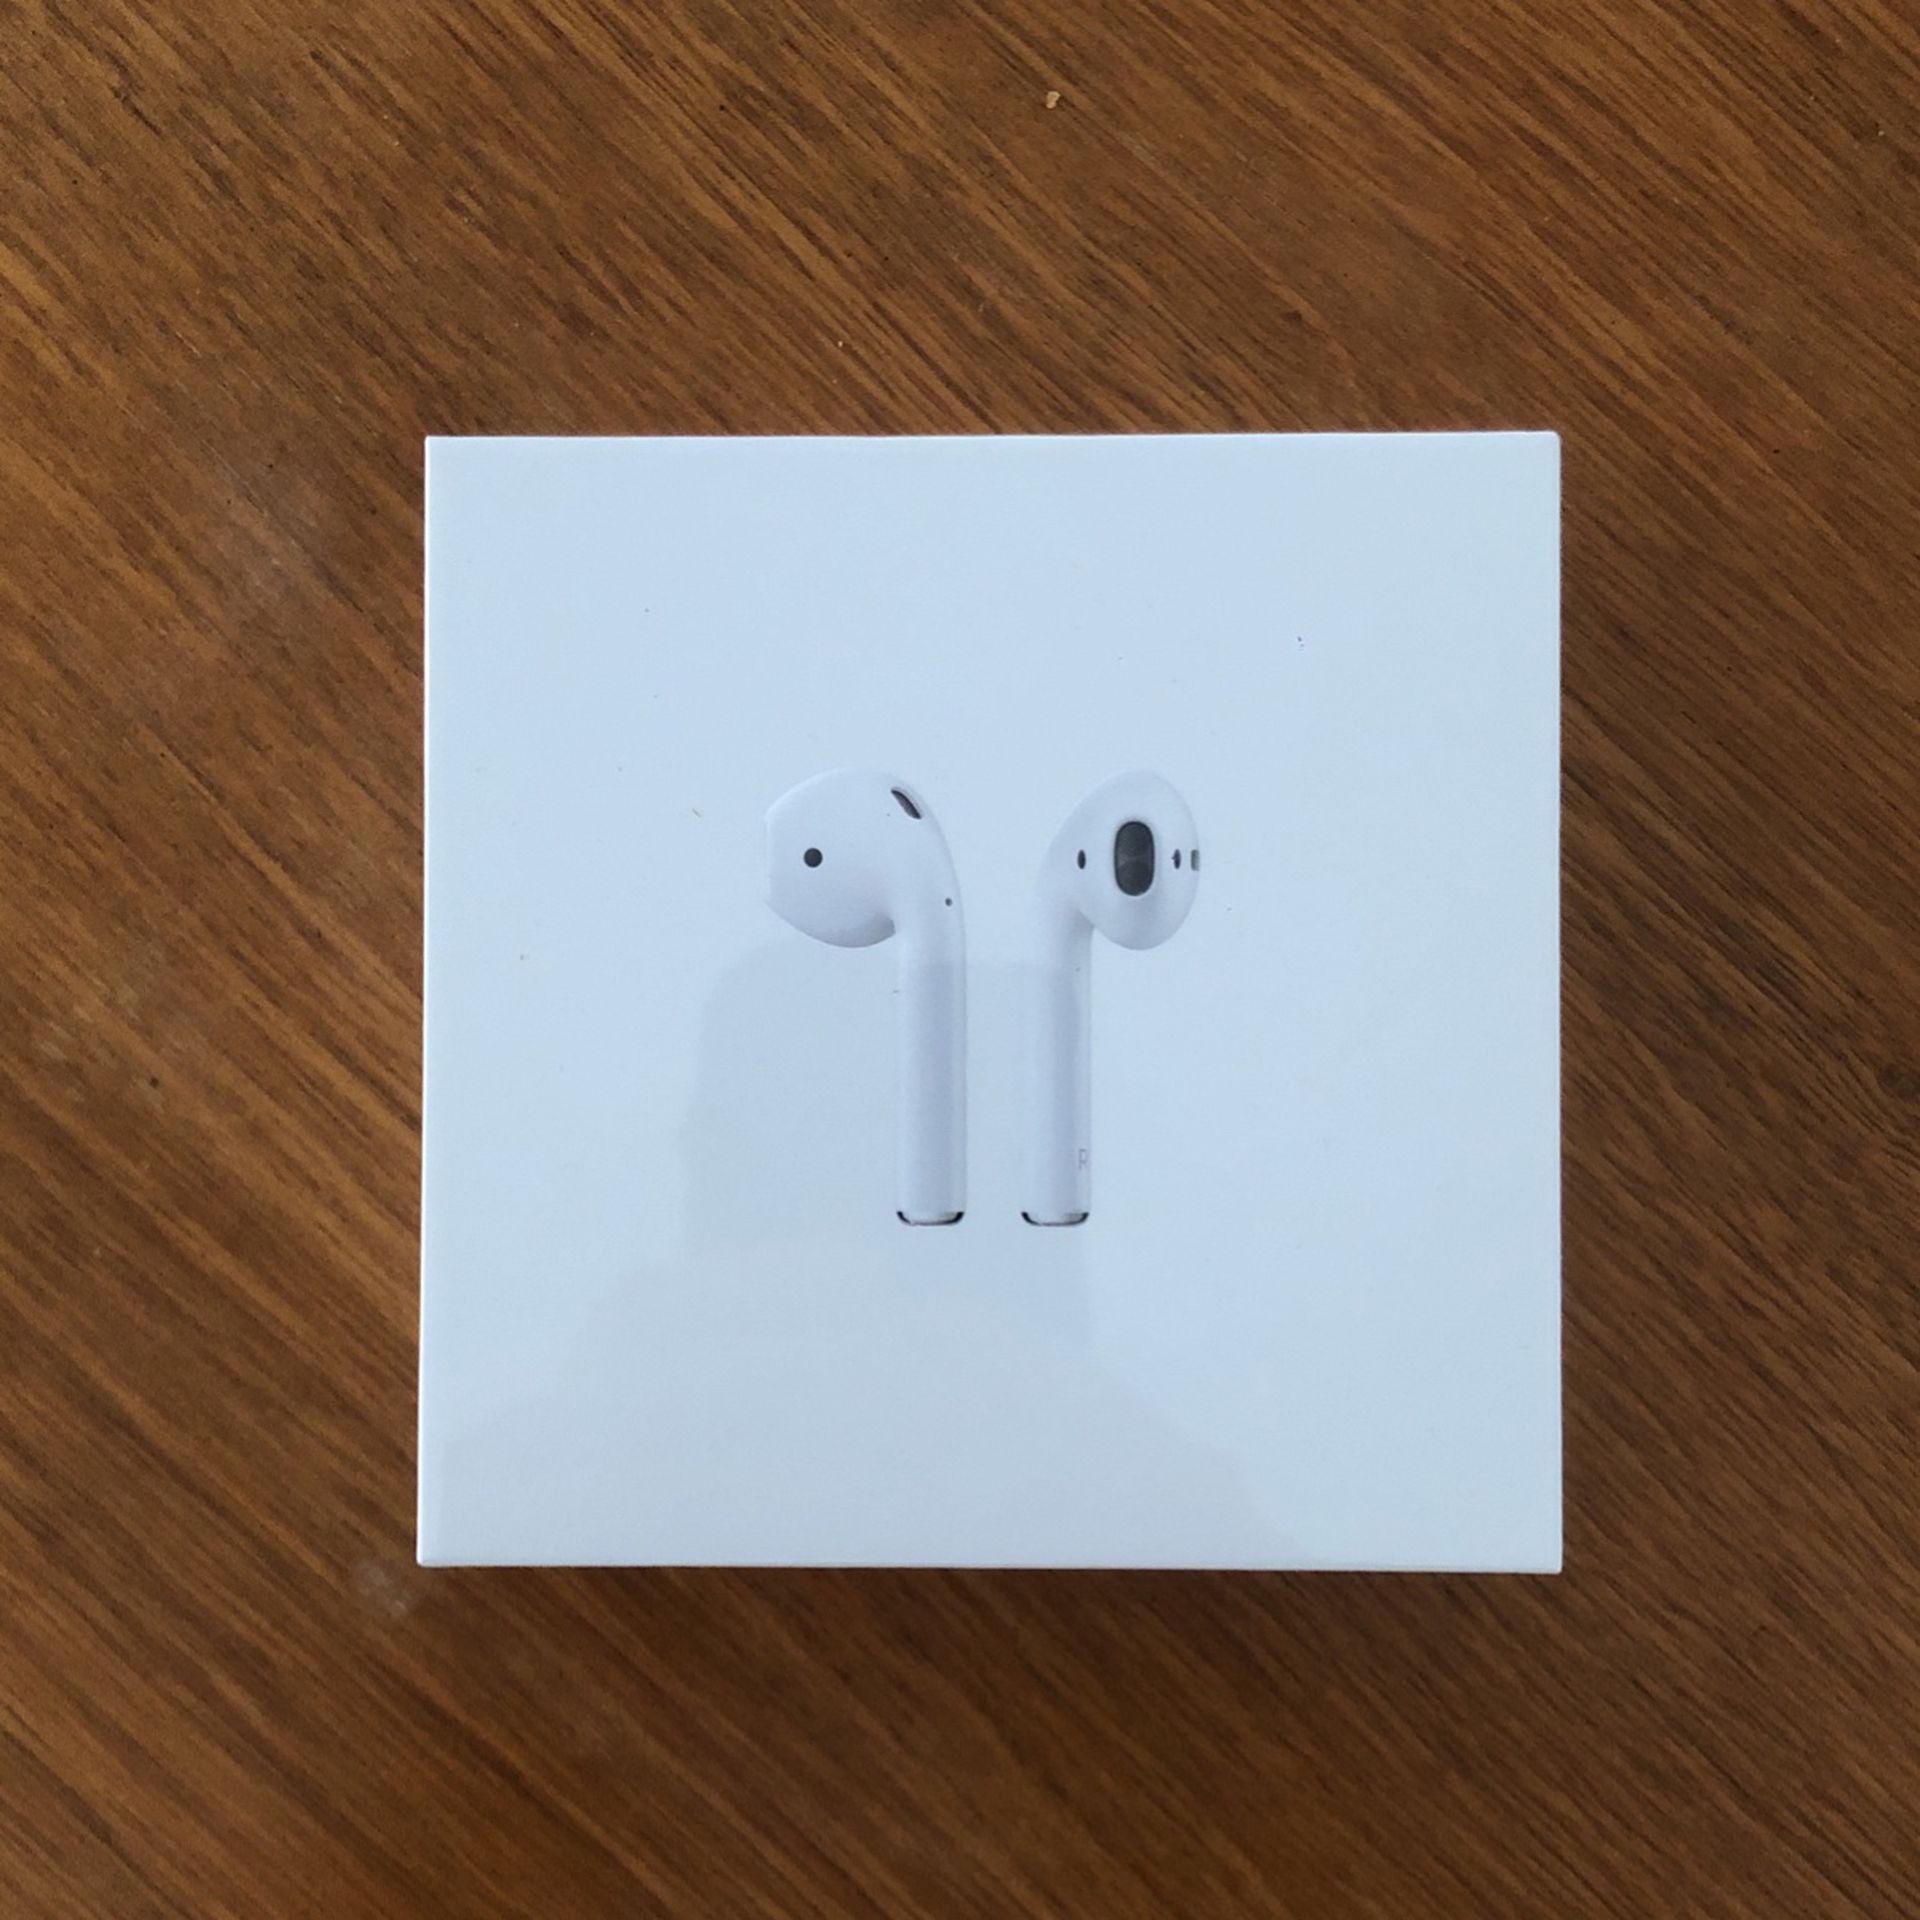 Apple AirPods 2 + Charging Case Unopened